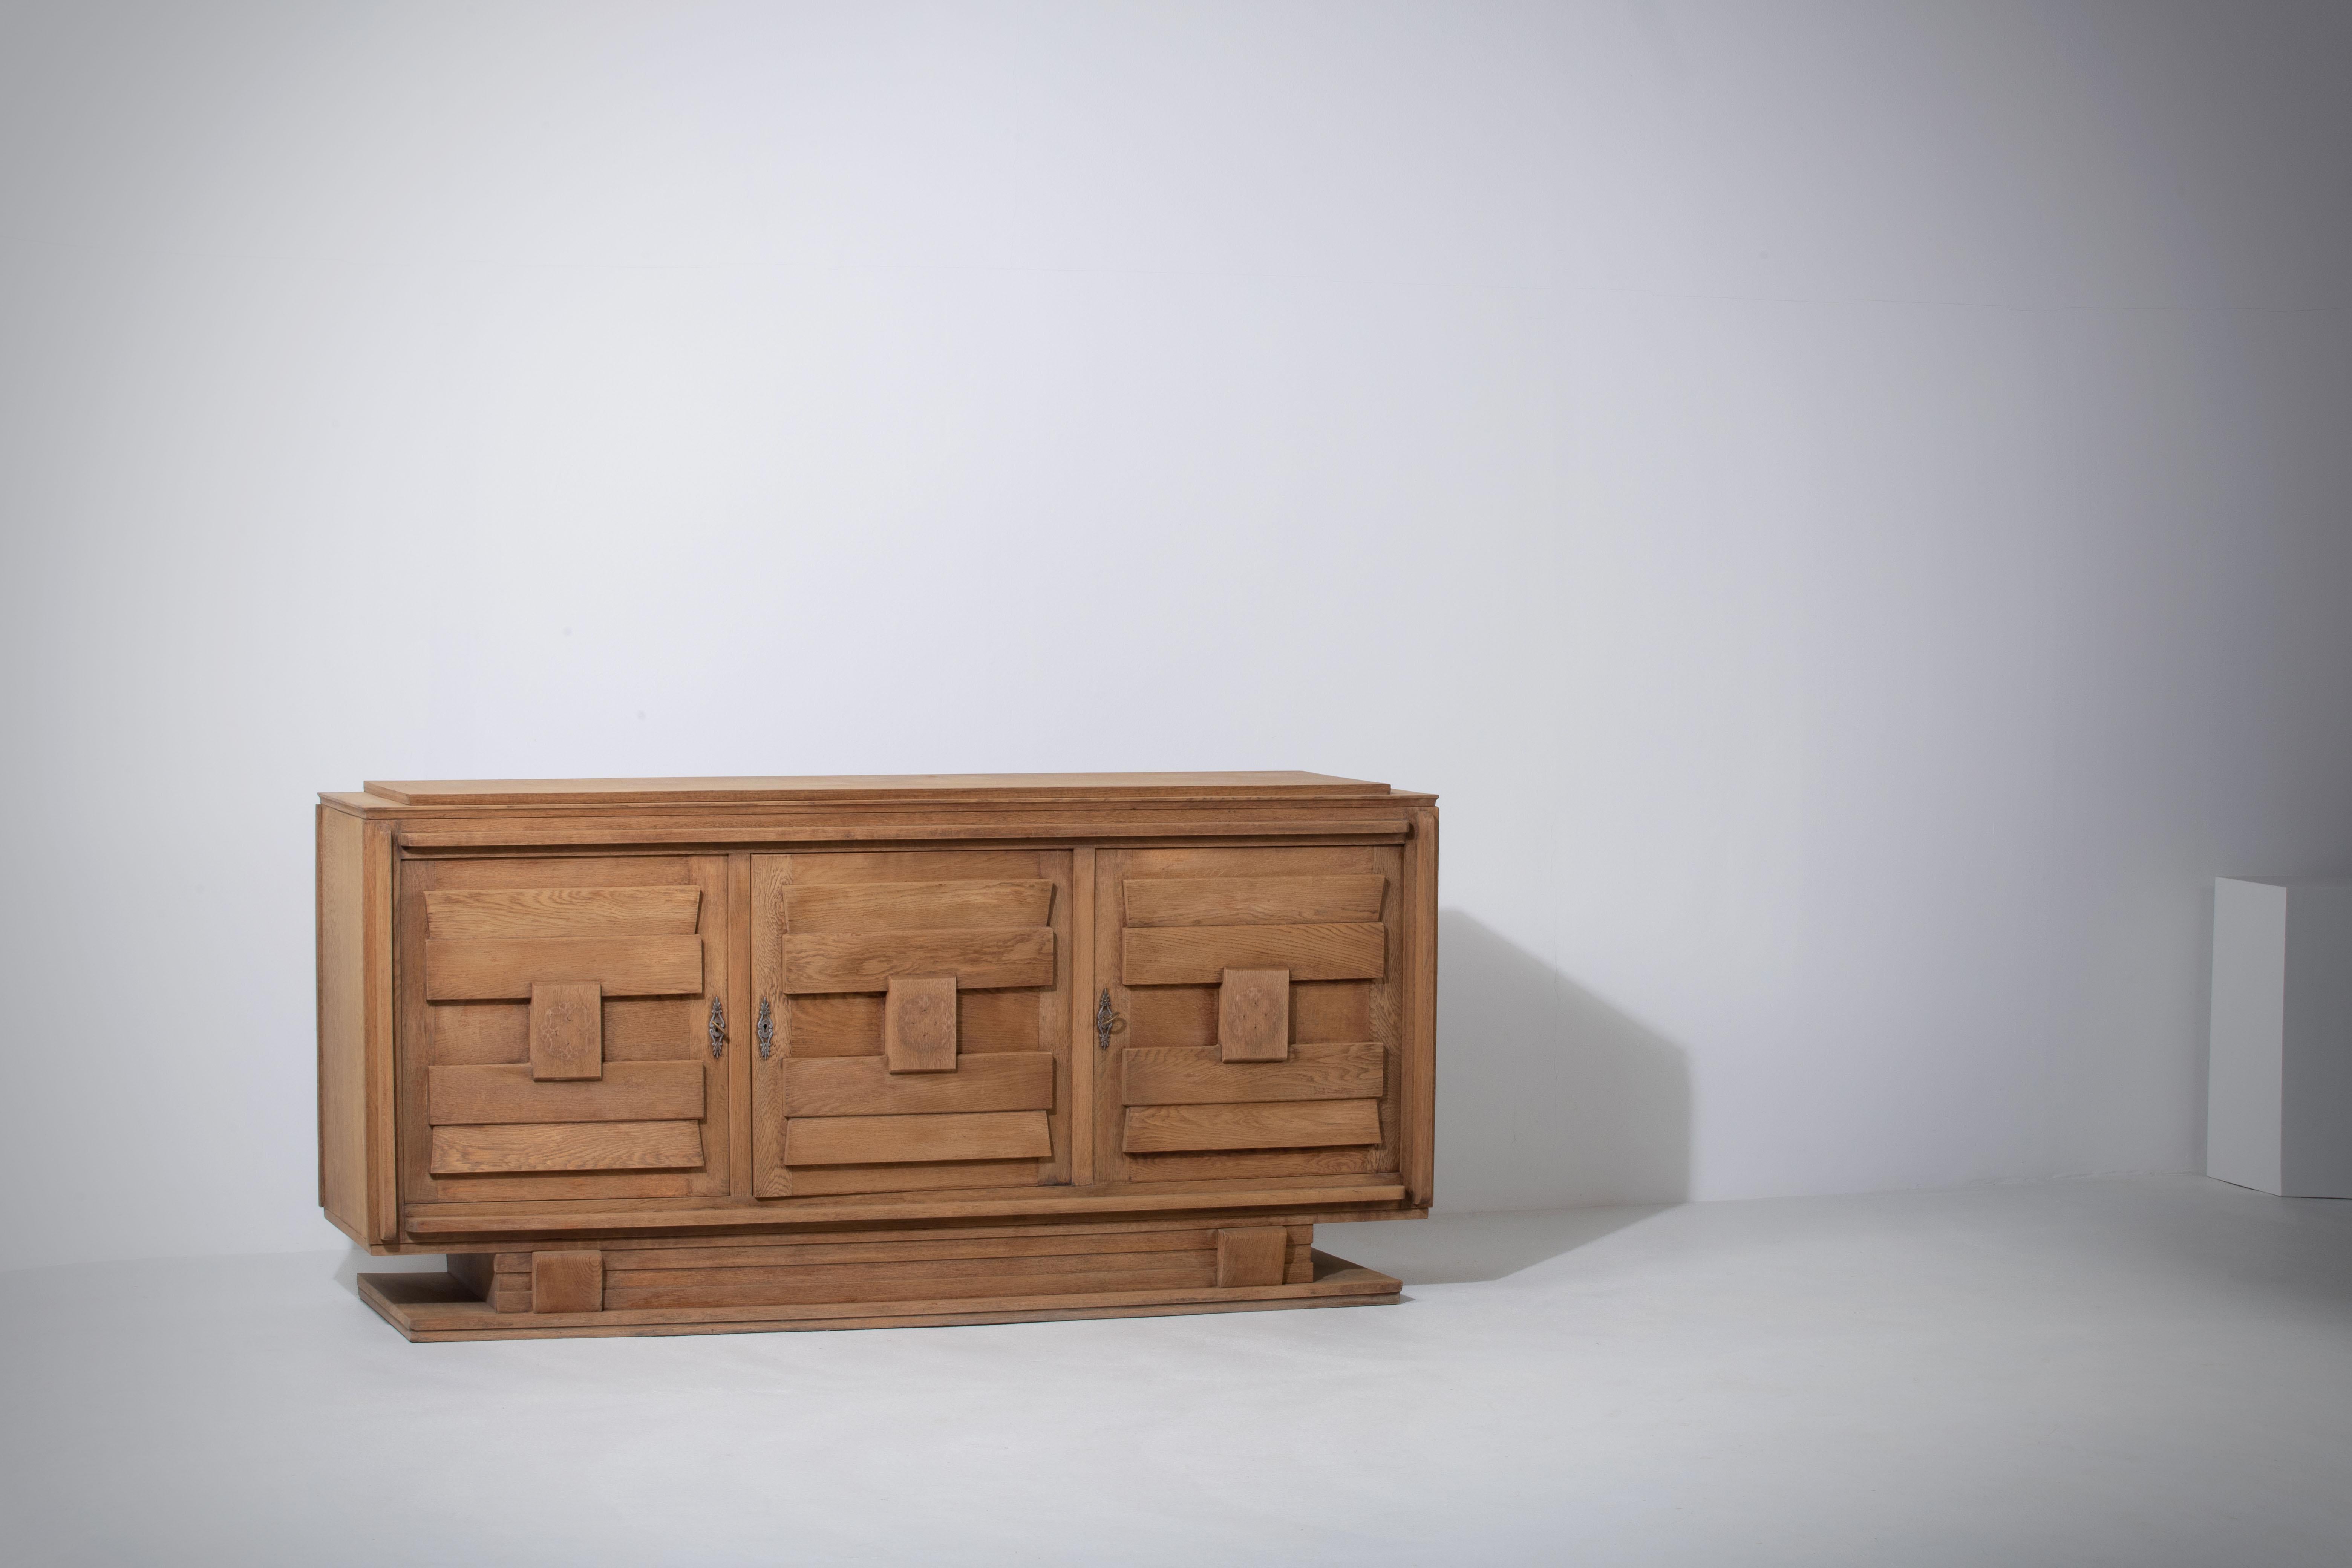 Elegant Credenza, Premium Solid Oak, France, Presumably Charles Dudouyt, 1940s.

Introducing a sophisticated Art Deco Brutalist sideboard, presumably crafted by the renowned French designer Charles Dudouyt in the 1940s. This large credenza,